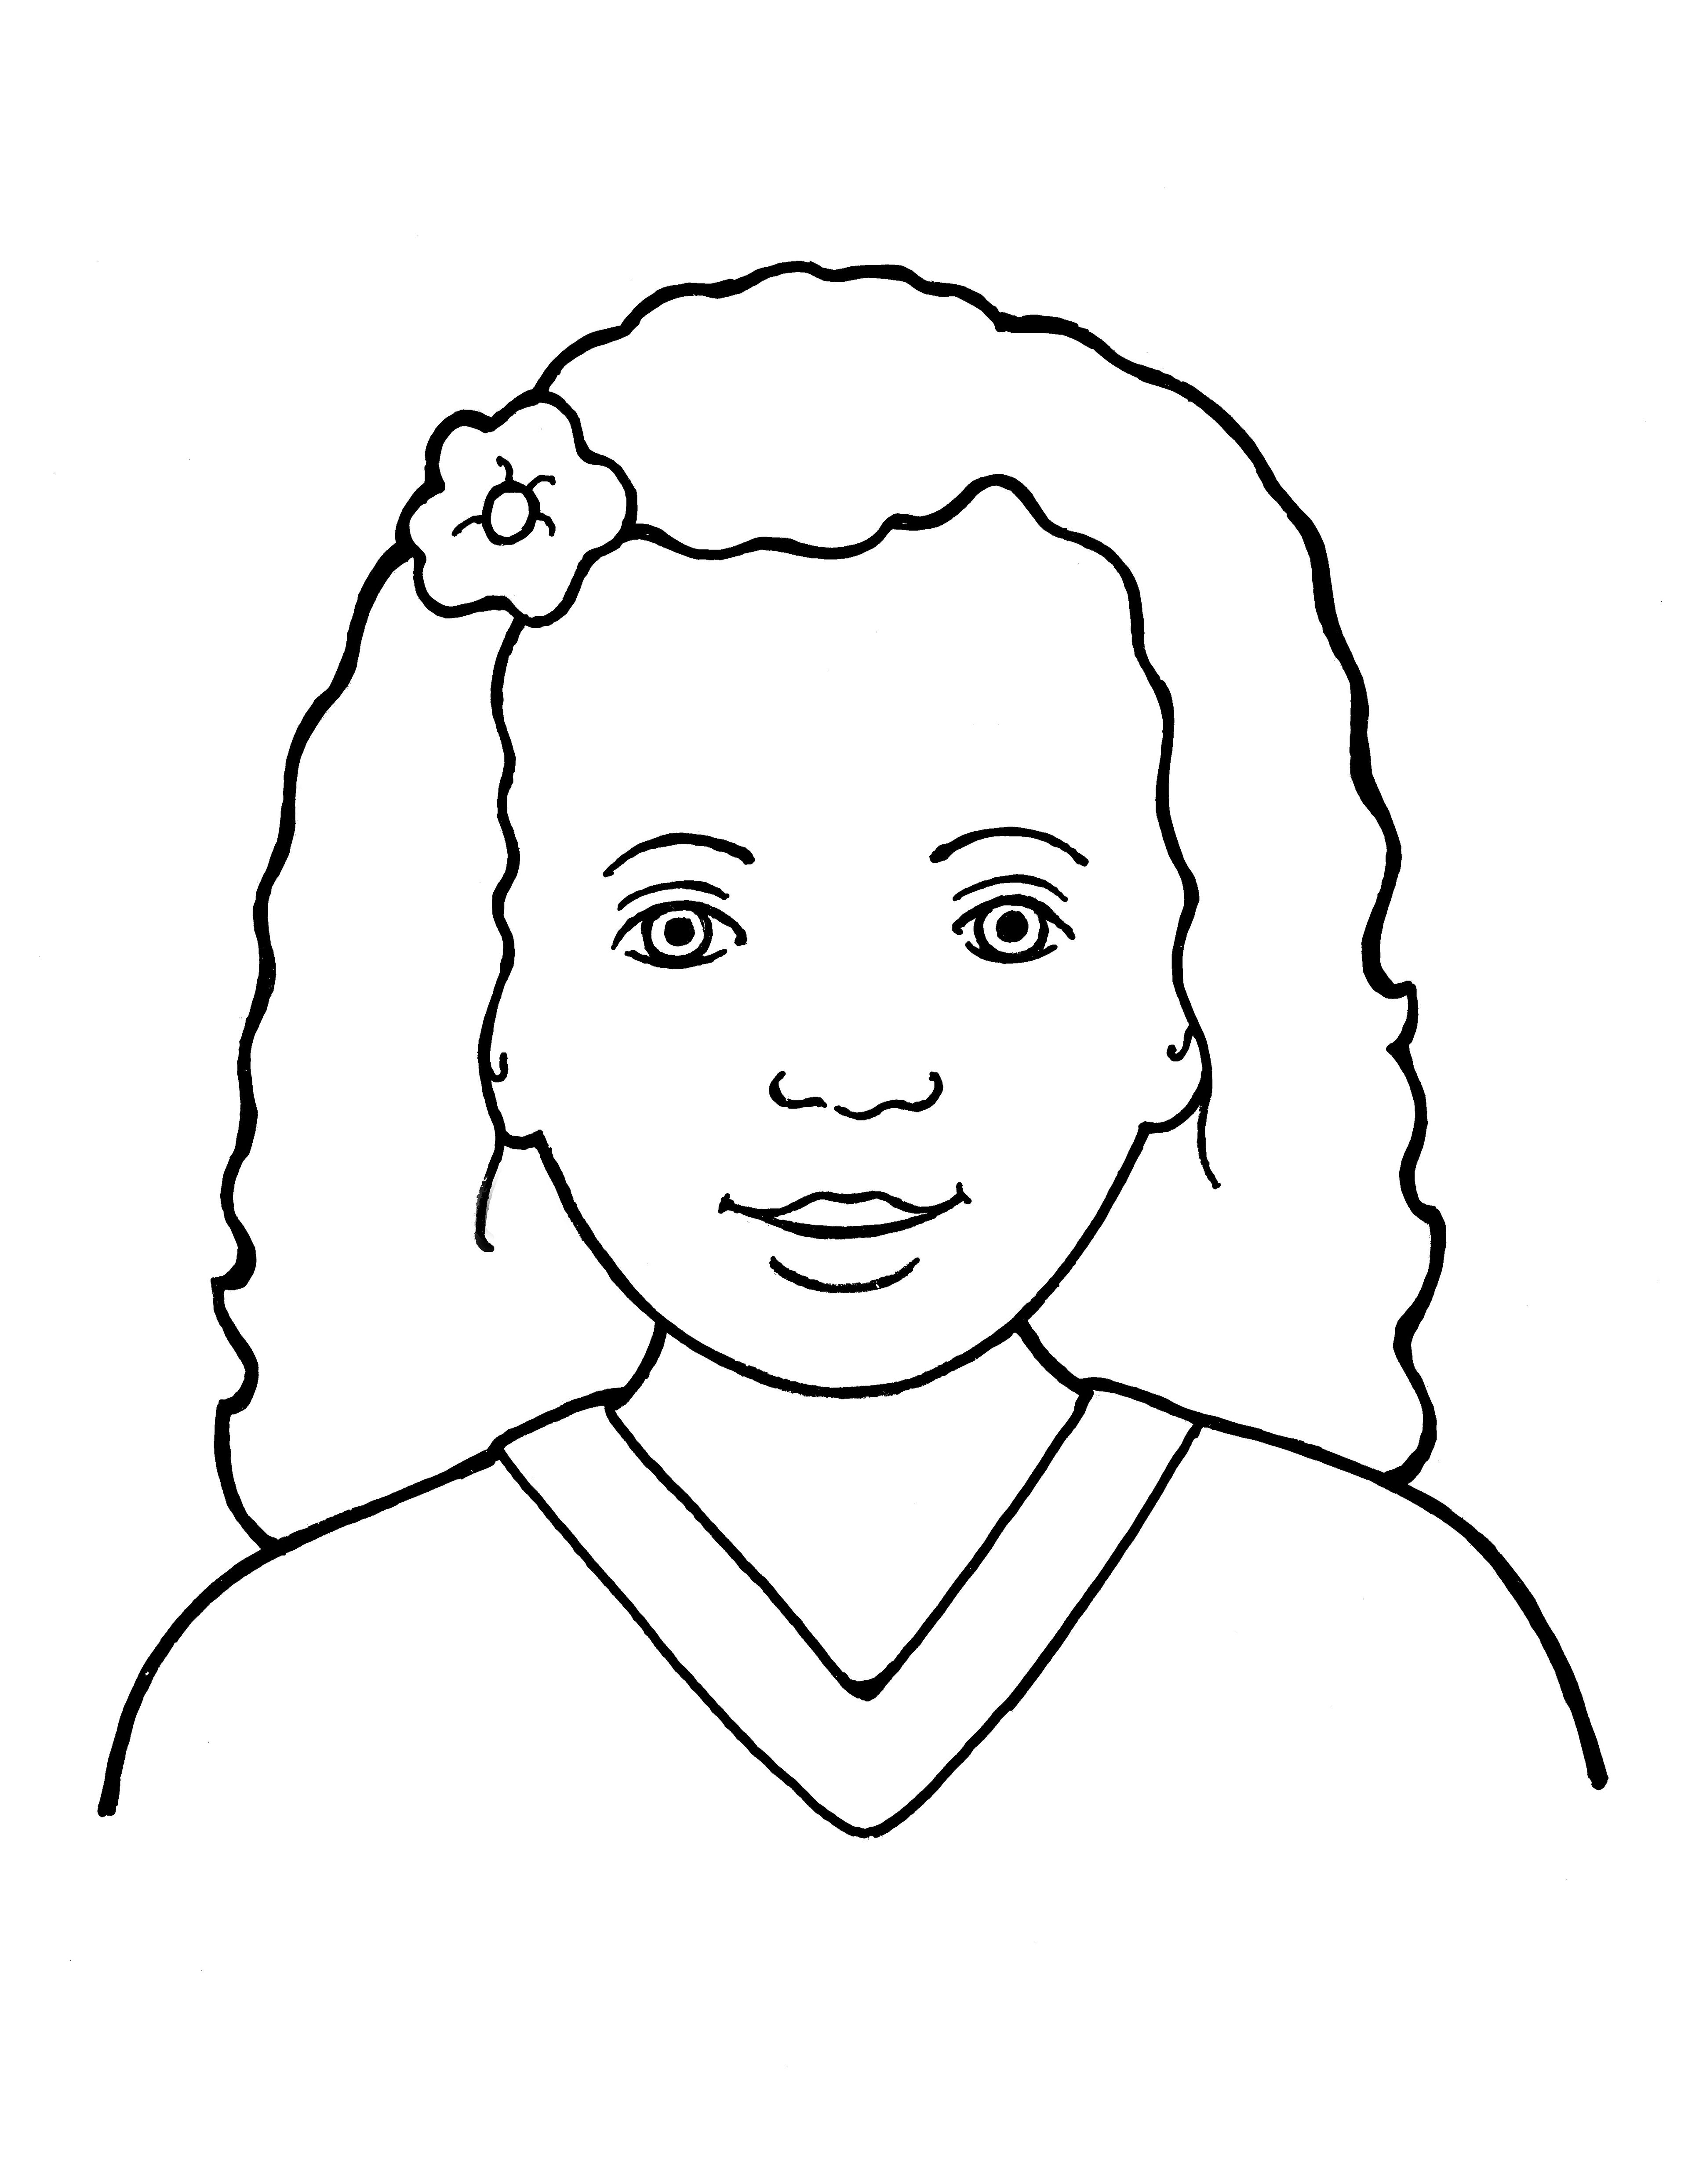 An illustration of a Primary-age girl from the nursery manual Behold Your Little Ones (2008), pages 23 and 71.